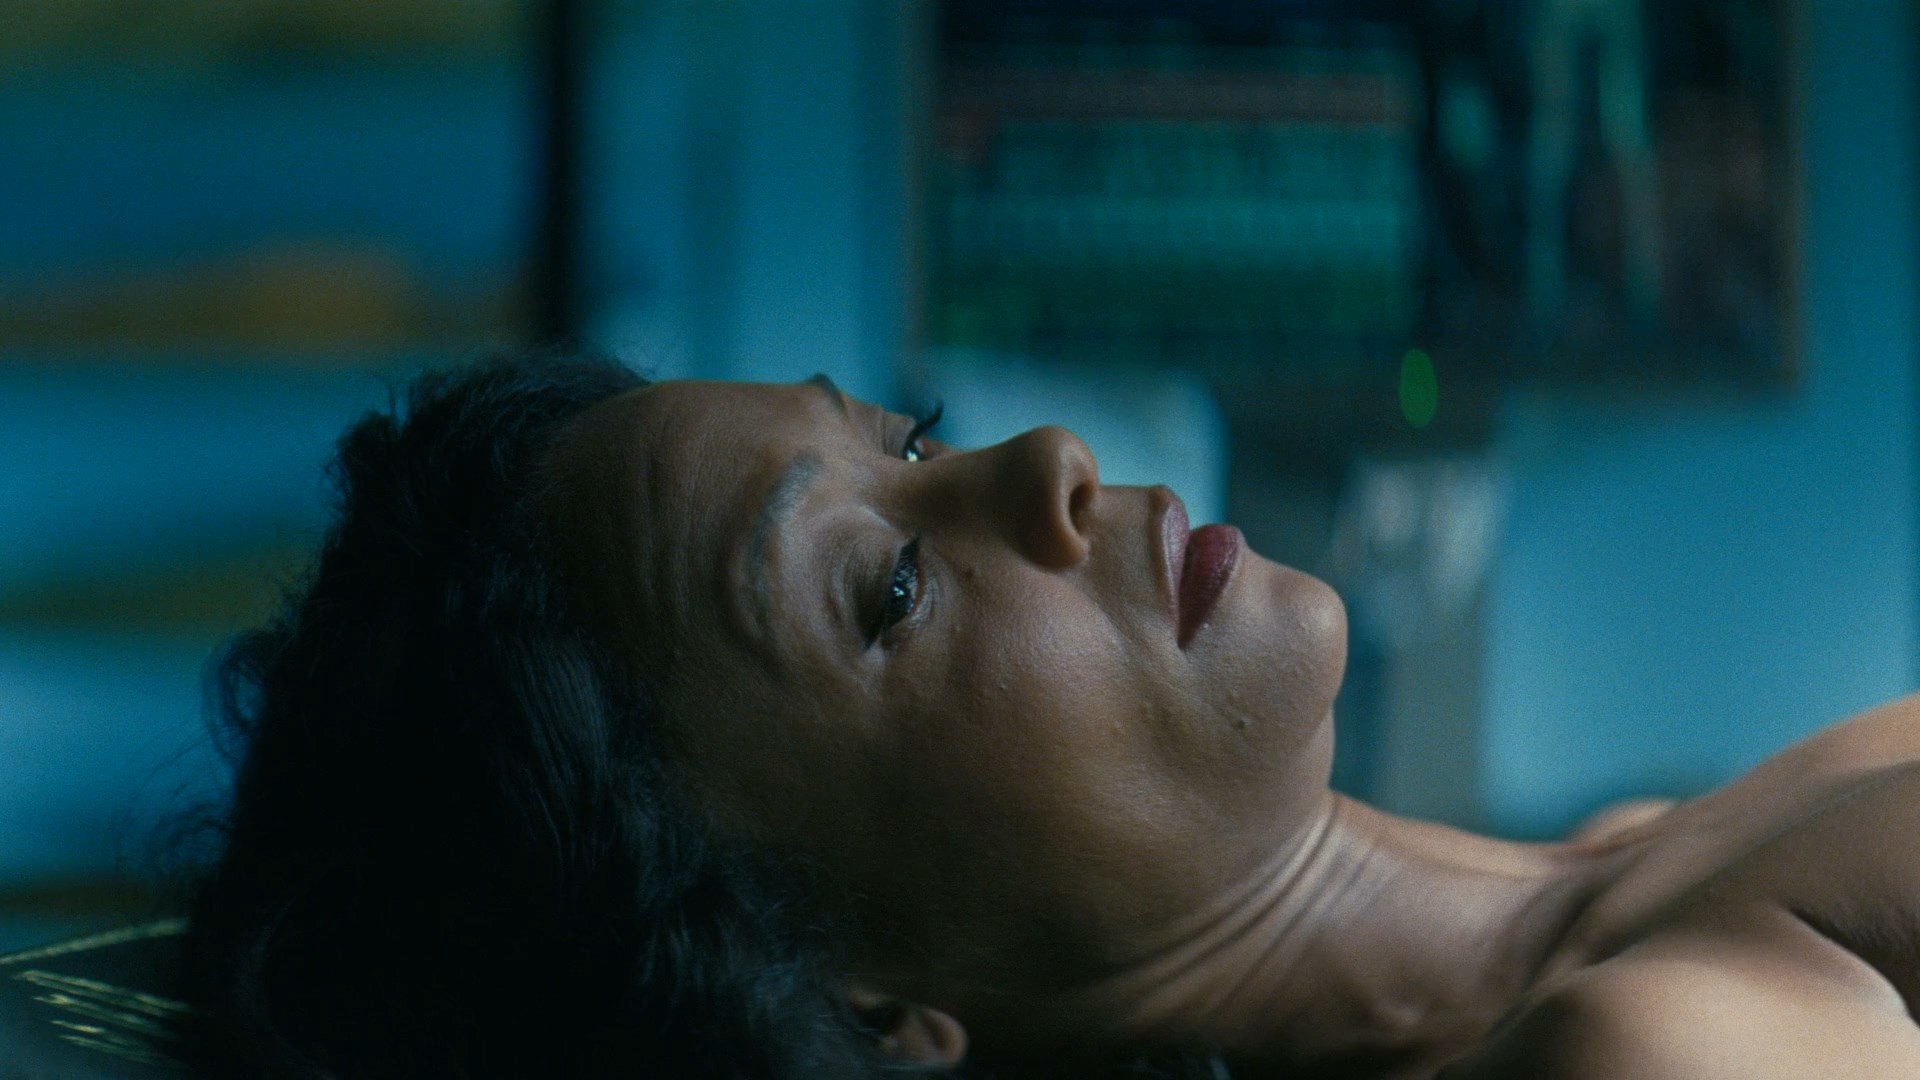 Thandie Newton is fully naked when she gets up from the operating table and...